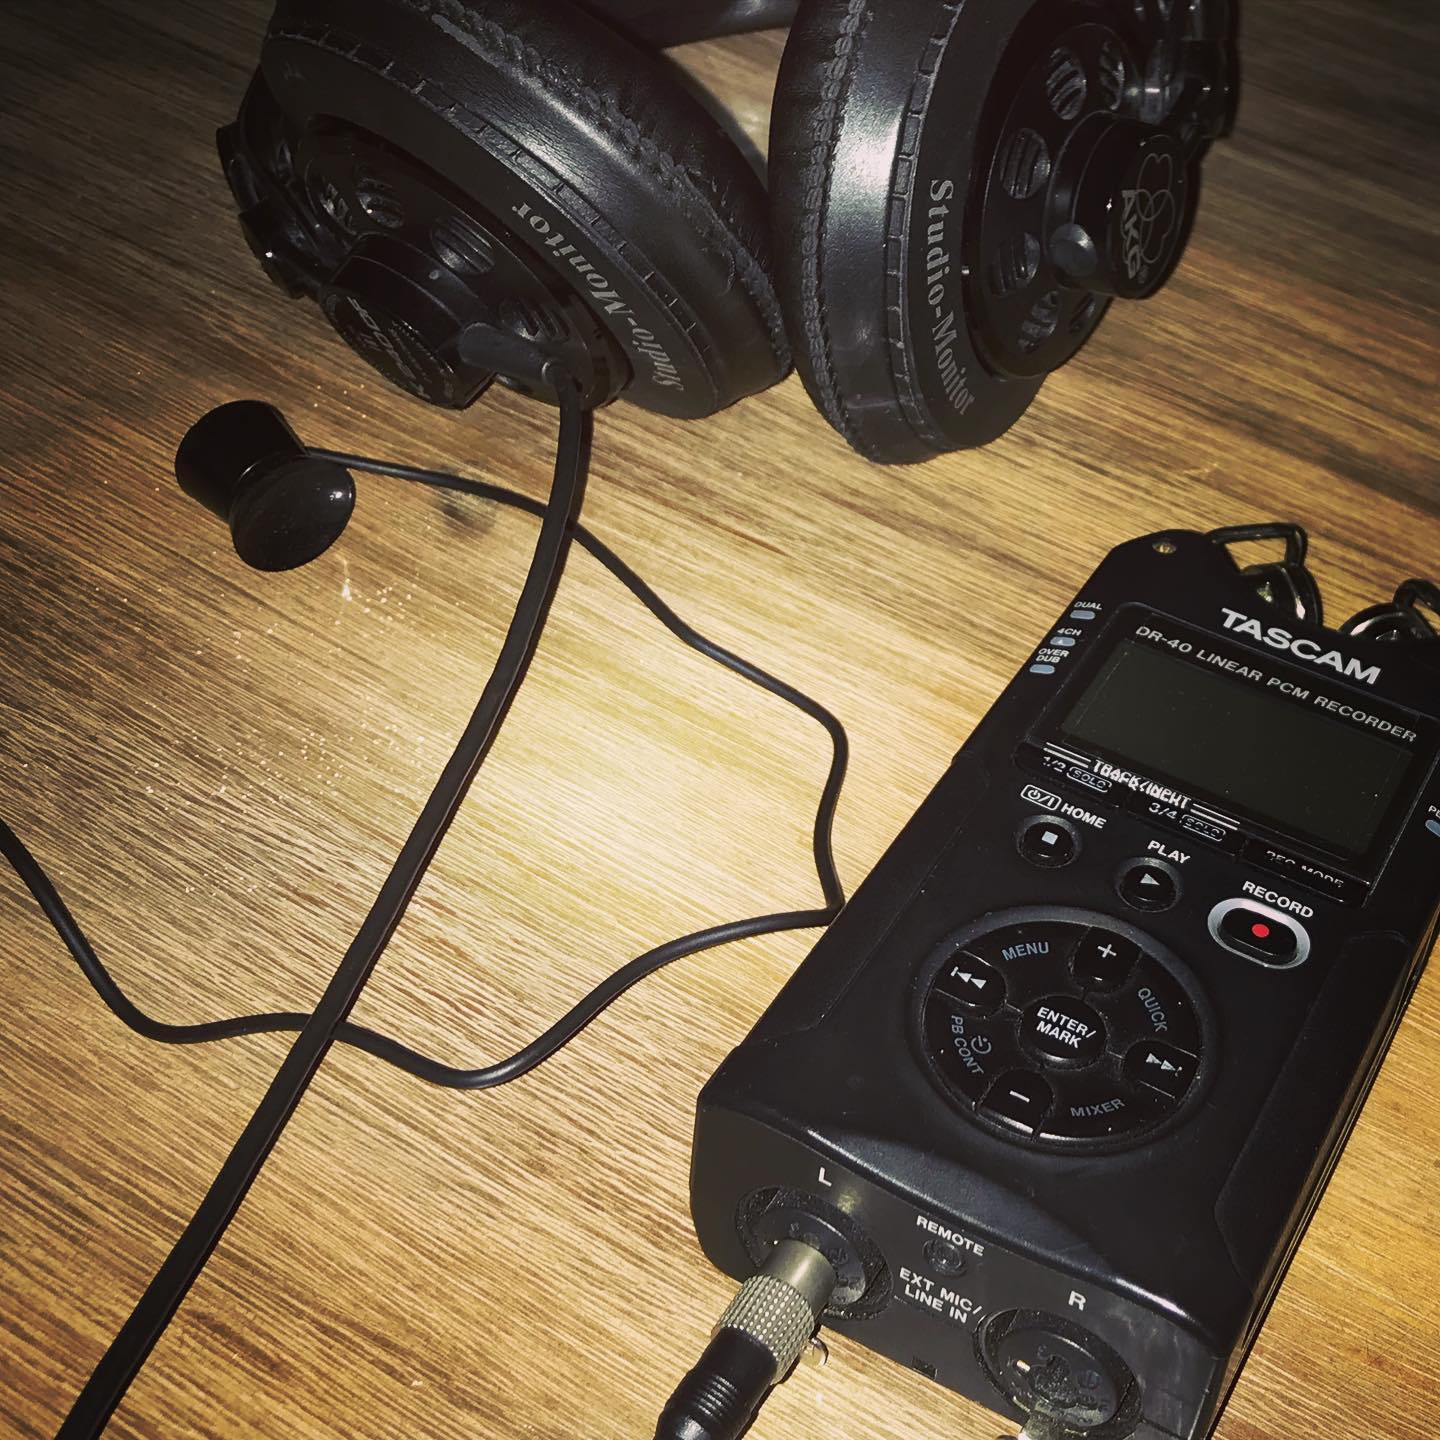 Continuing my way to DAWless... I am happy about the used TASCAM DR40 v2; #eagertofieldrecord #recordelectromagneticfields #recordingsession